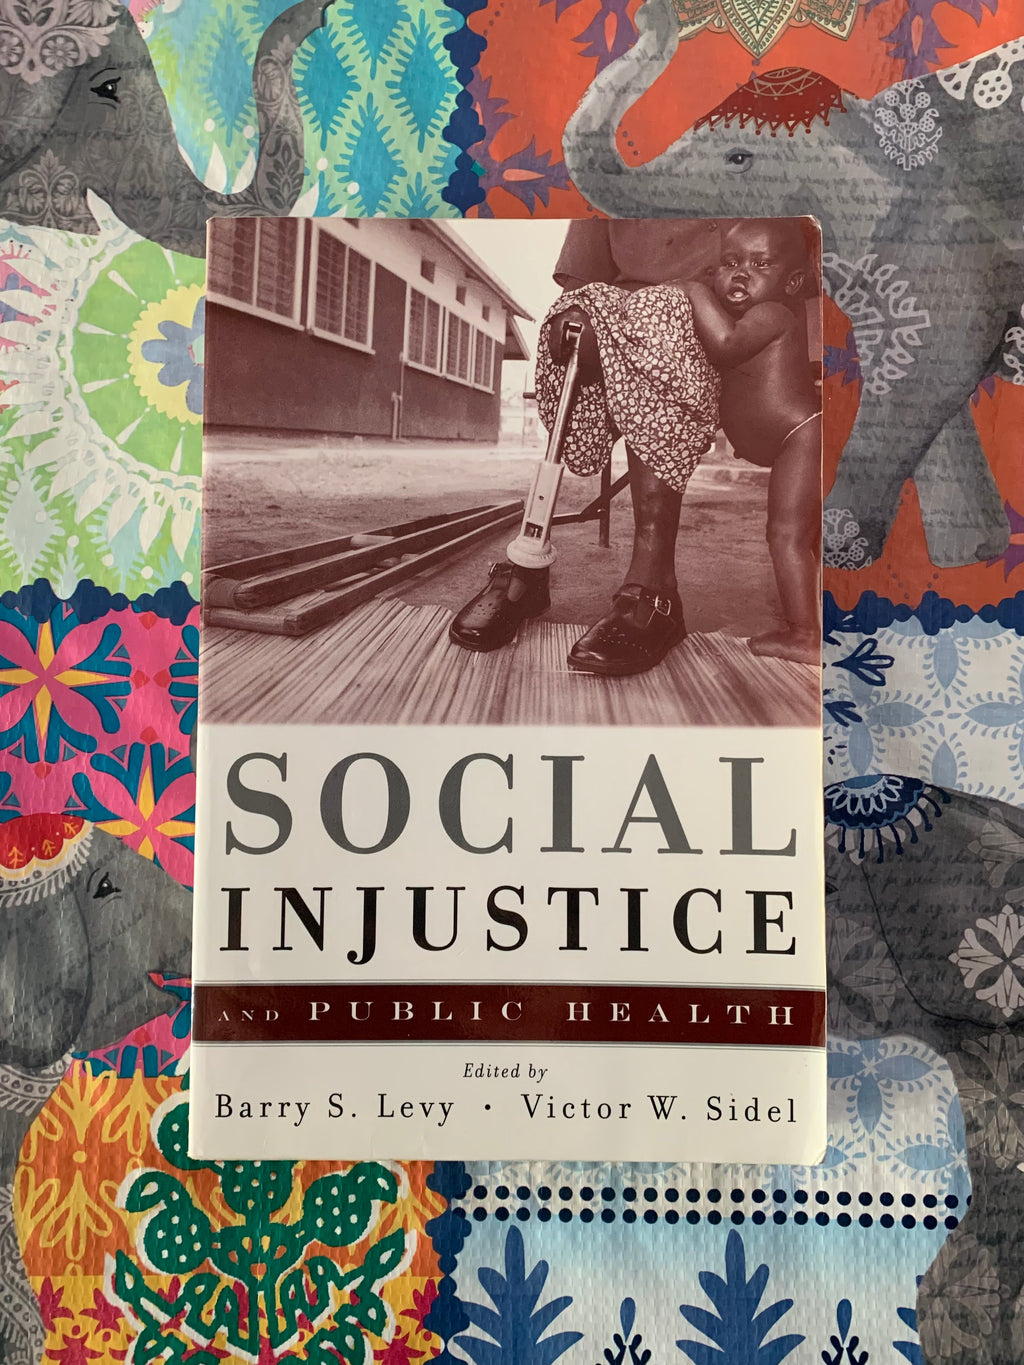 Social Injustice and Public Health- By Barry S. Levy